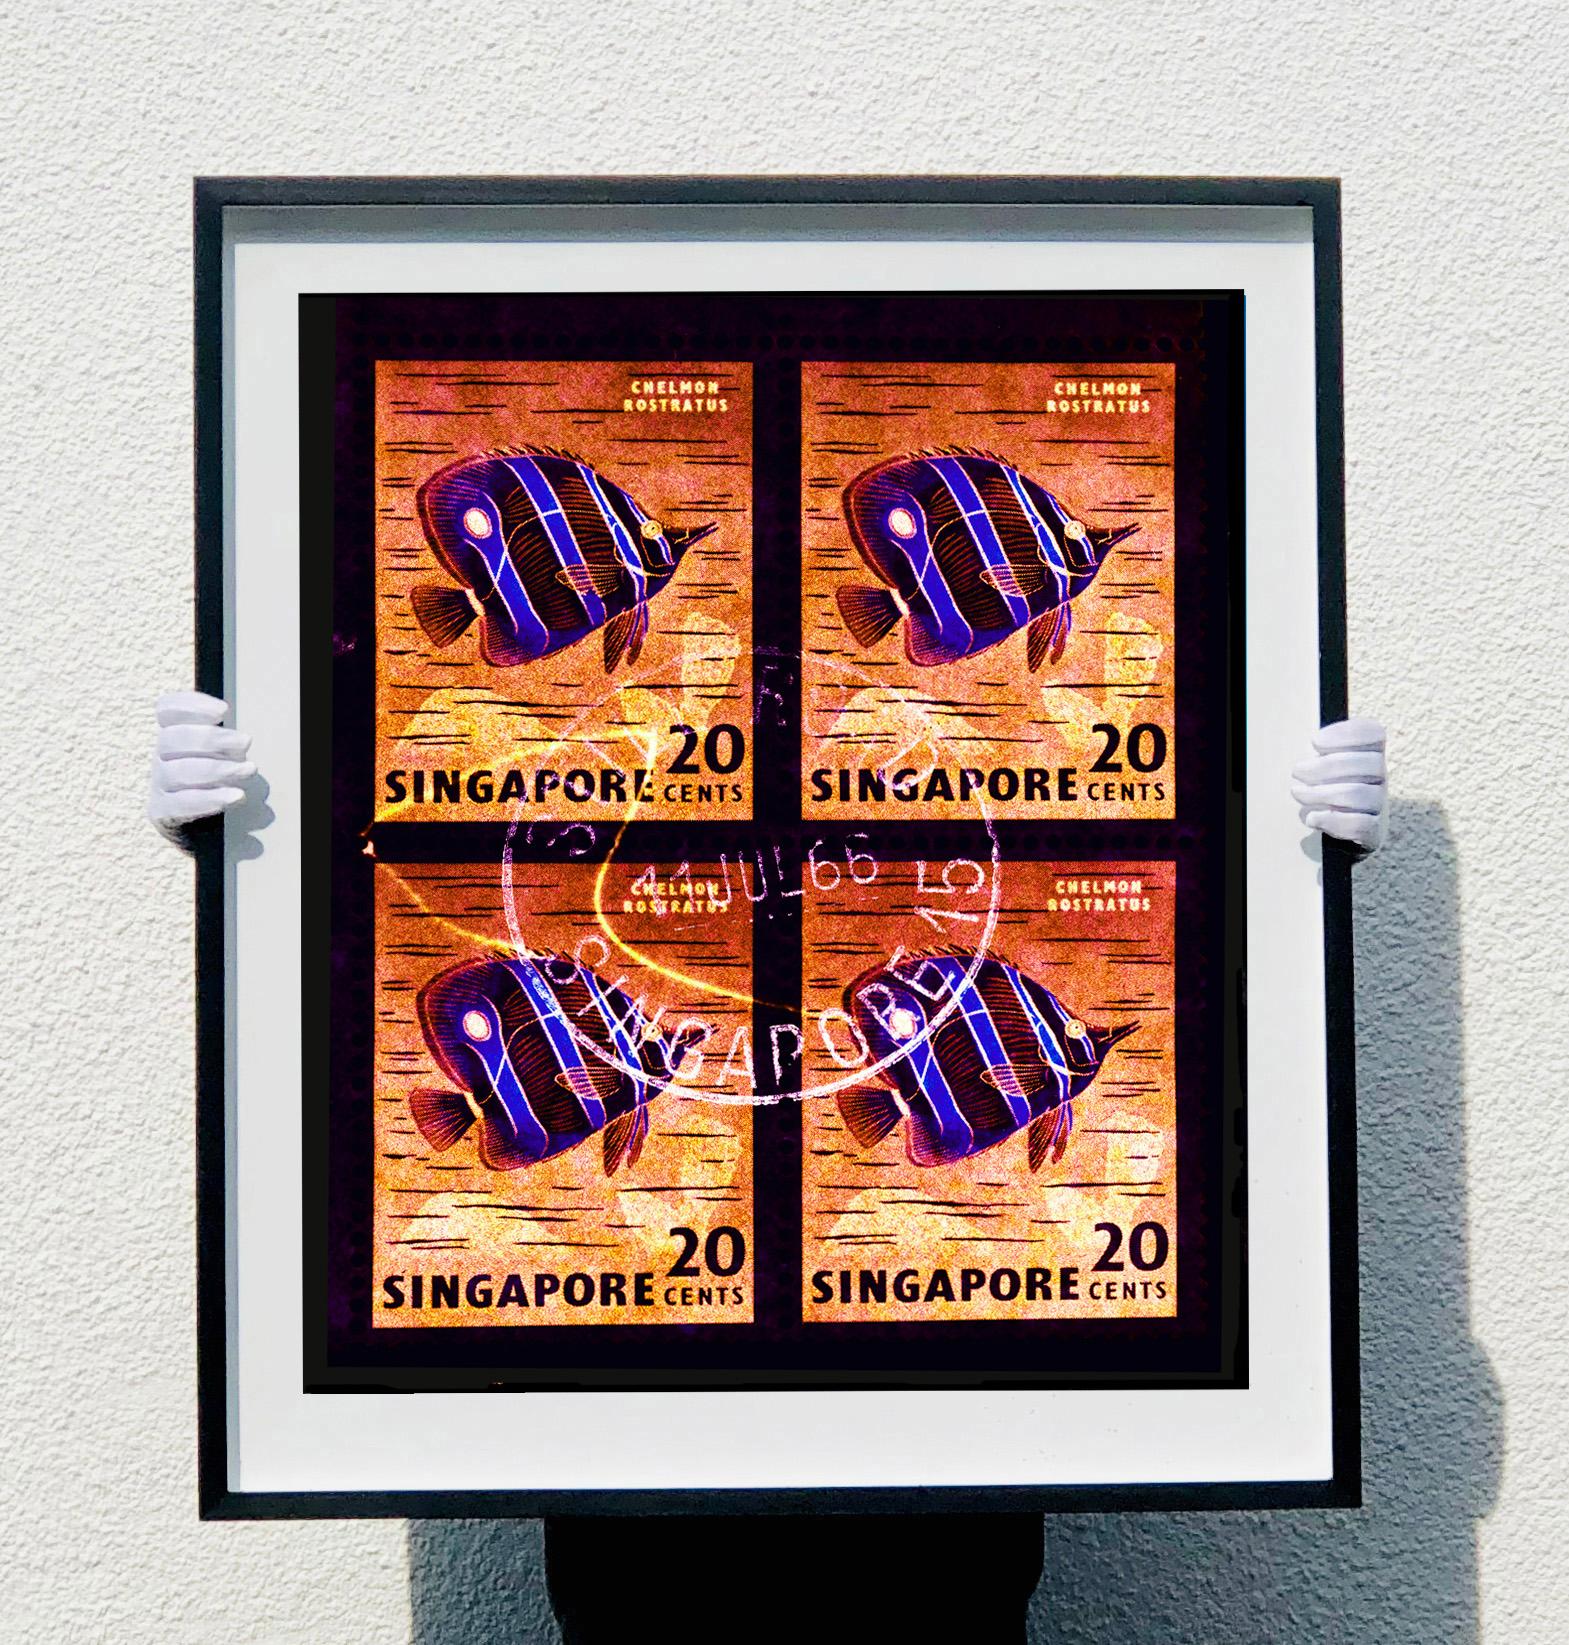 Singapore Stamp Collection, 20c Singapore Butterfly Fish (Gold) - Pop Art Photo - Black Color Photograph by Heidler & Heeps